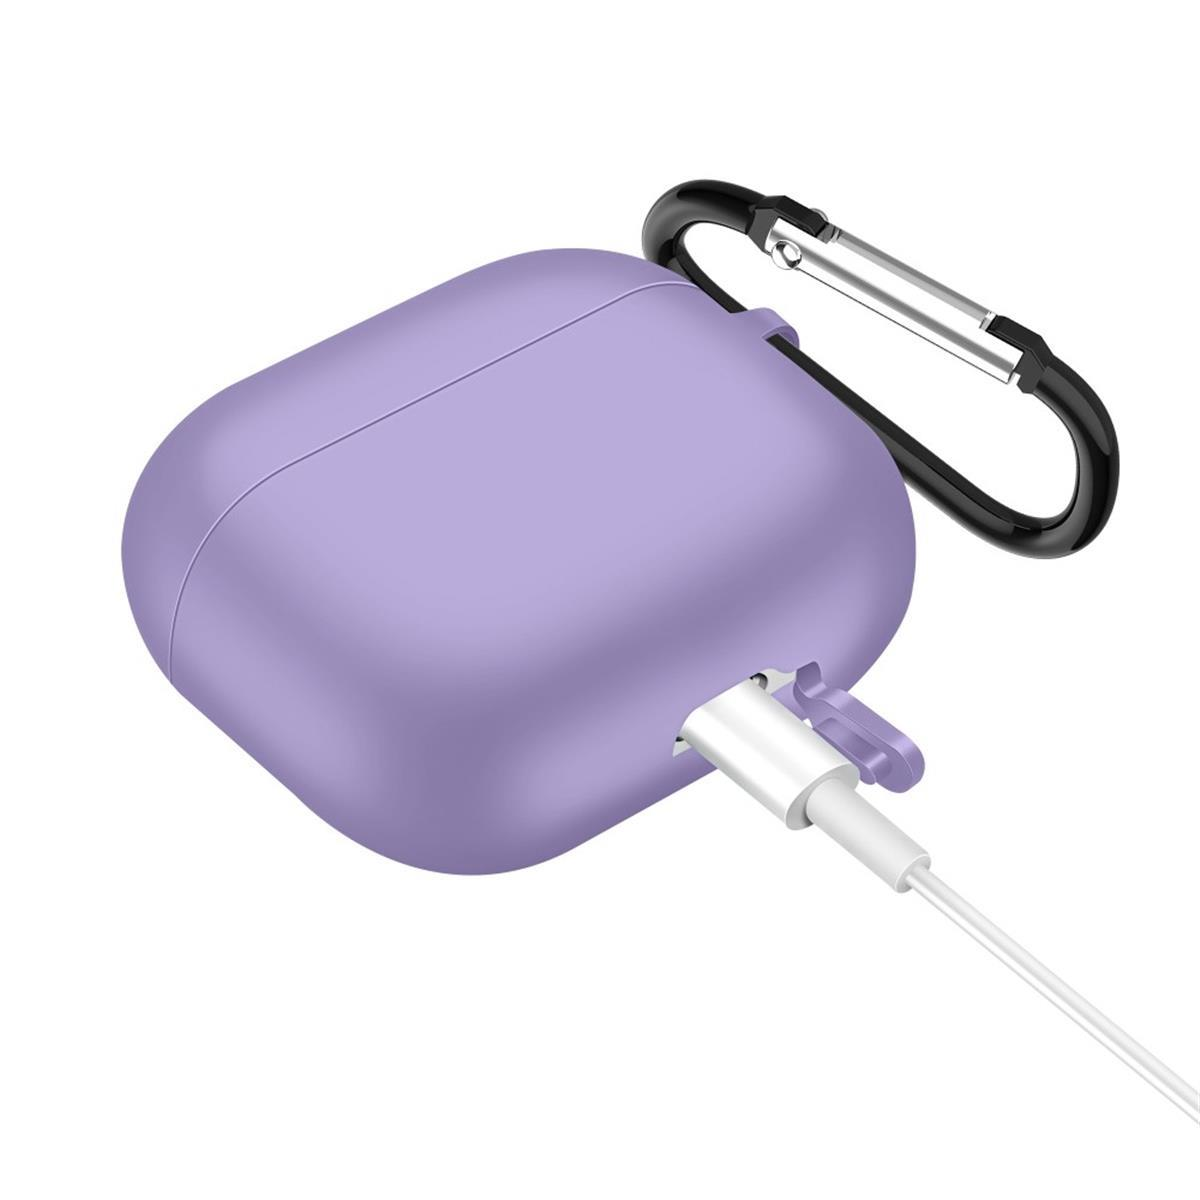 COVERKINGZ Silikoncover für AirPods 76811 Apple Ladecase Lila, 3 Damen,